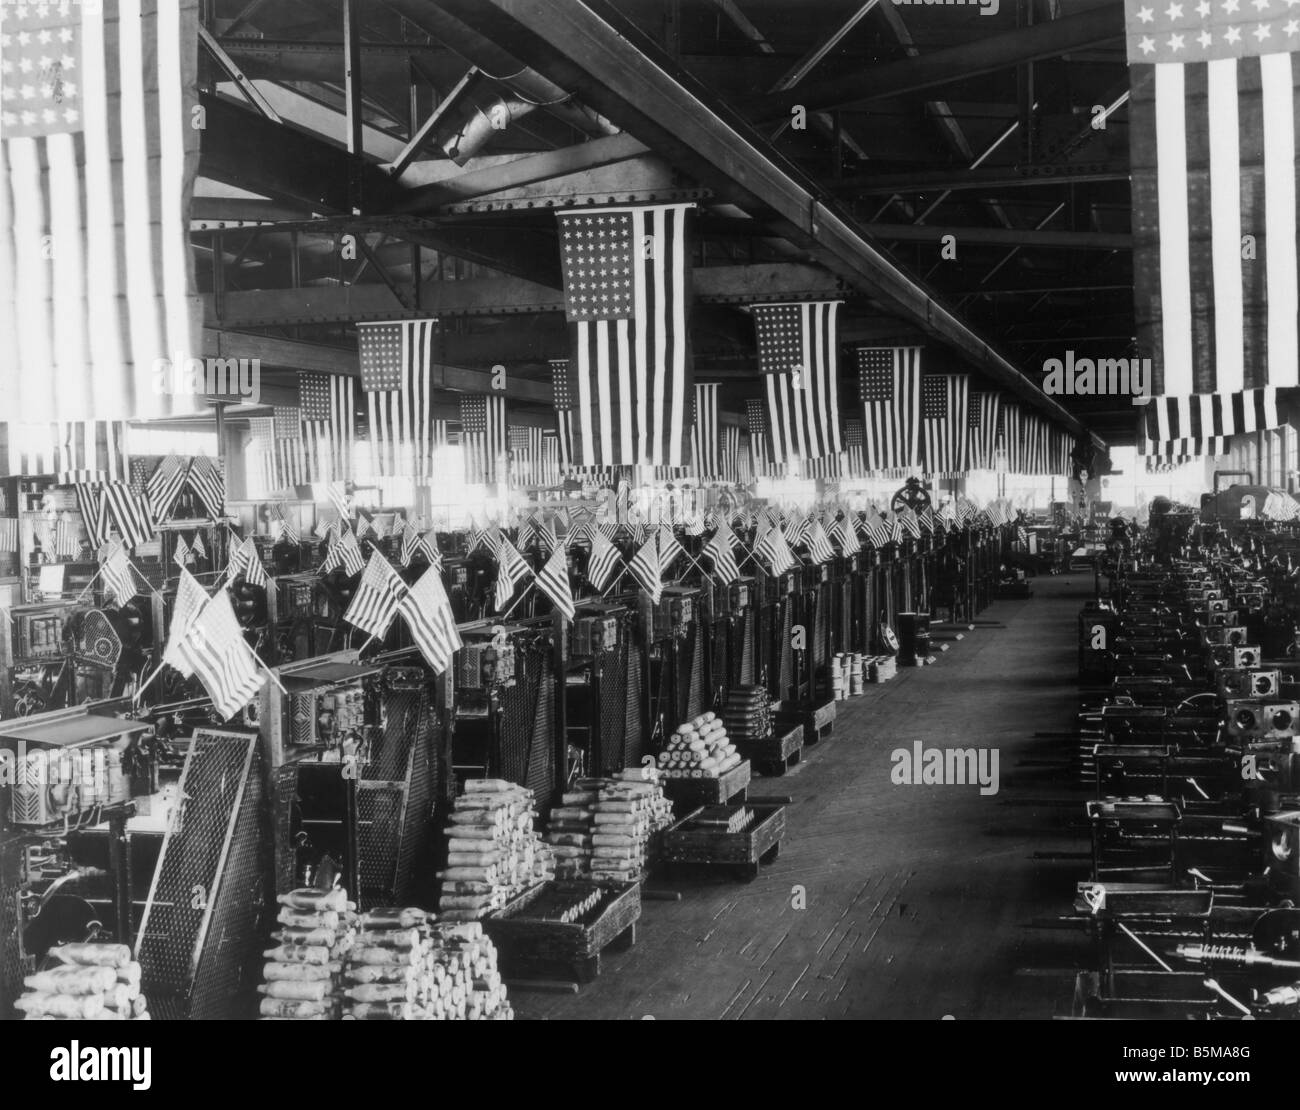 2 G55 R1 1918 2 US shell case factory World War I History World War I Arms industry USA Factory hall of the Bethlehem Steel Comp Stock Photo